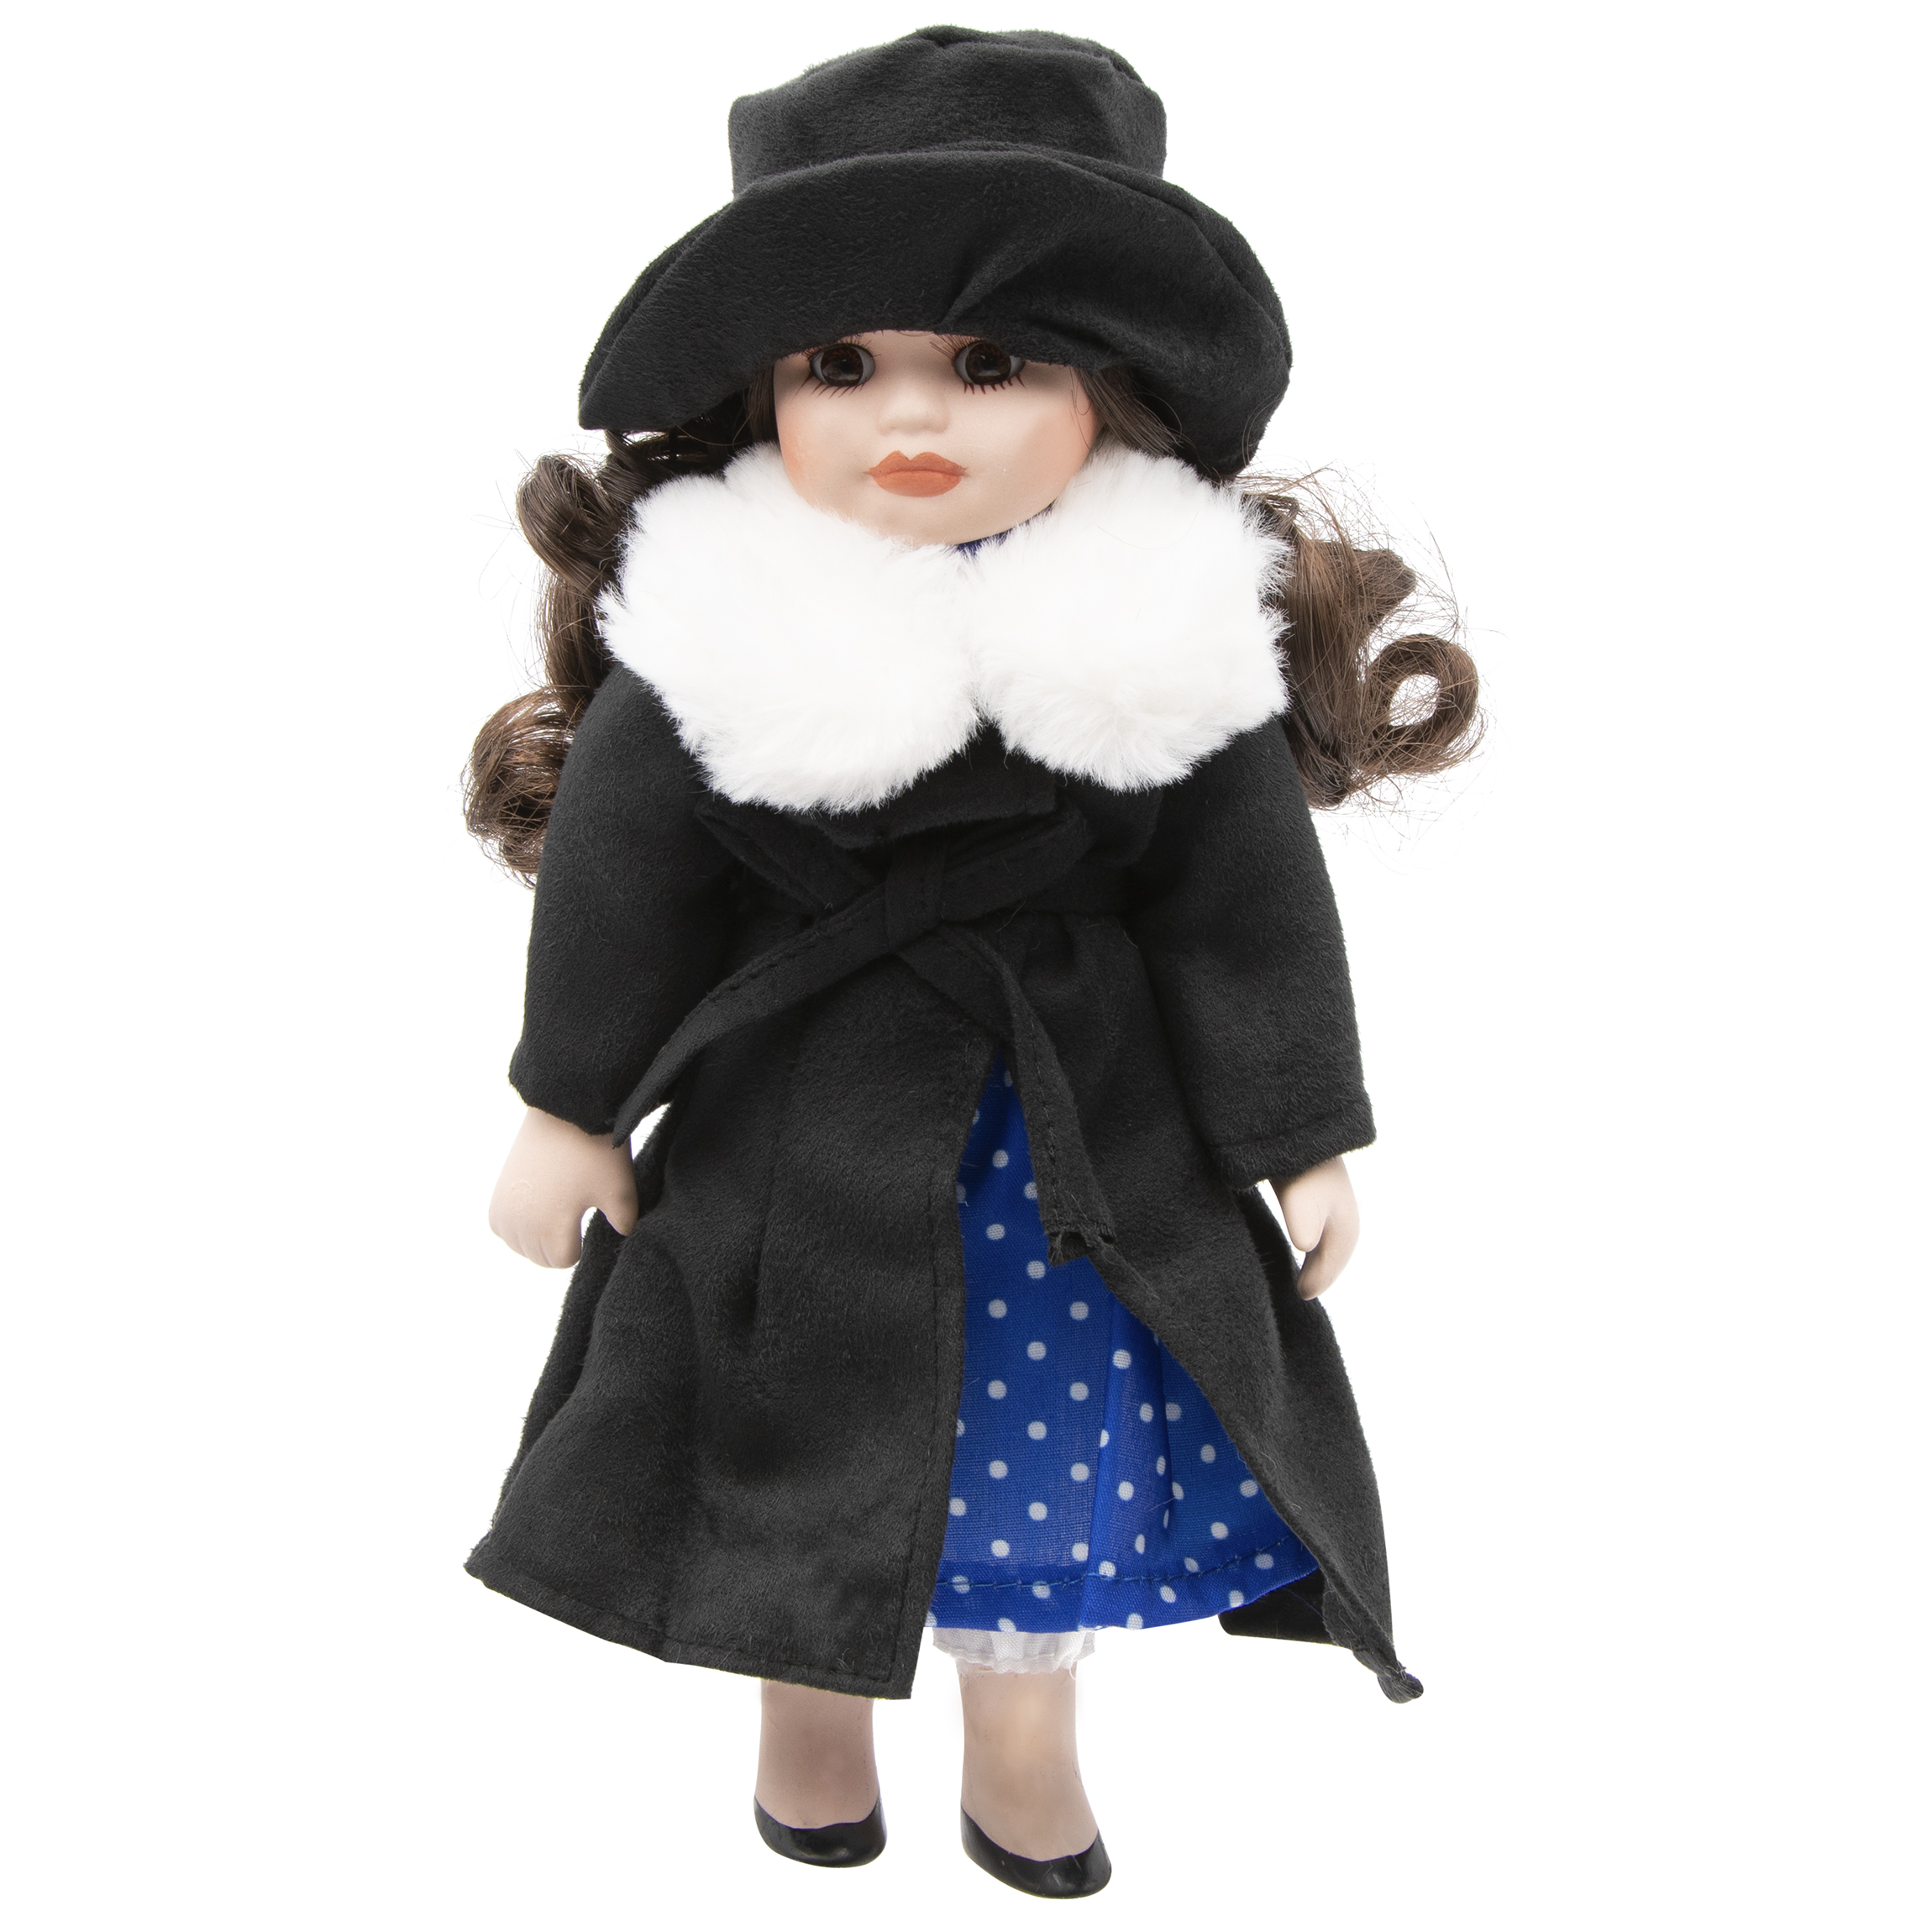 The Royalton Collection Royalton Collection Dolls of the Decade 30's Vintage "Betty" 10" Porcelain Doll